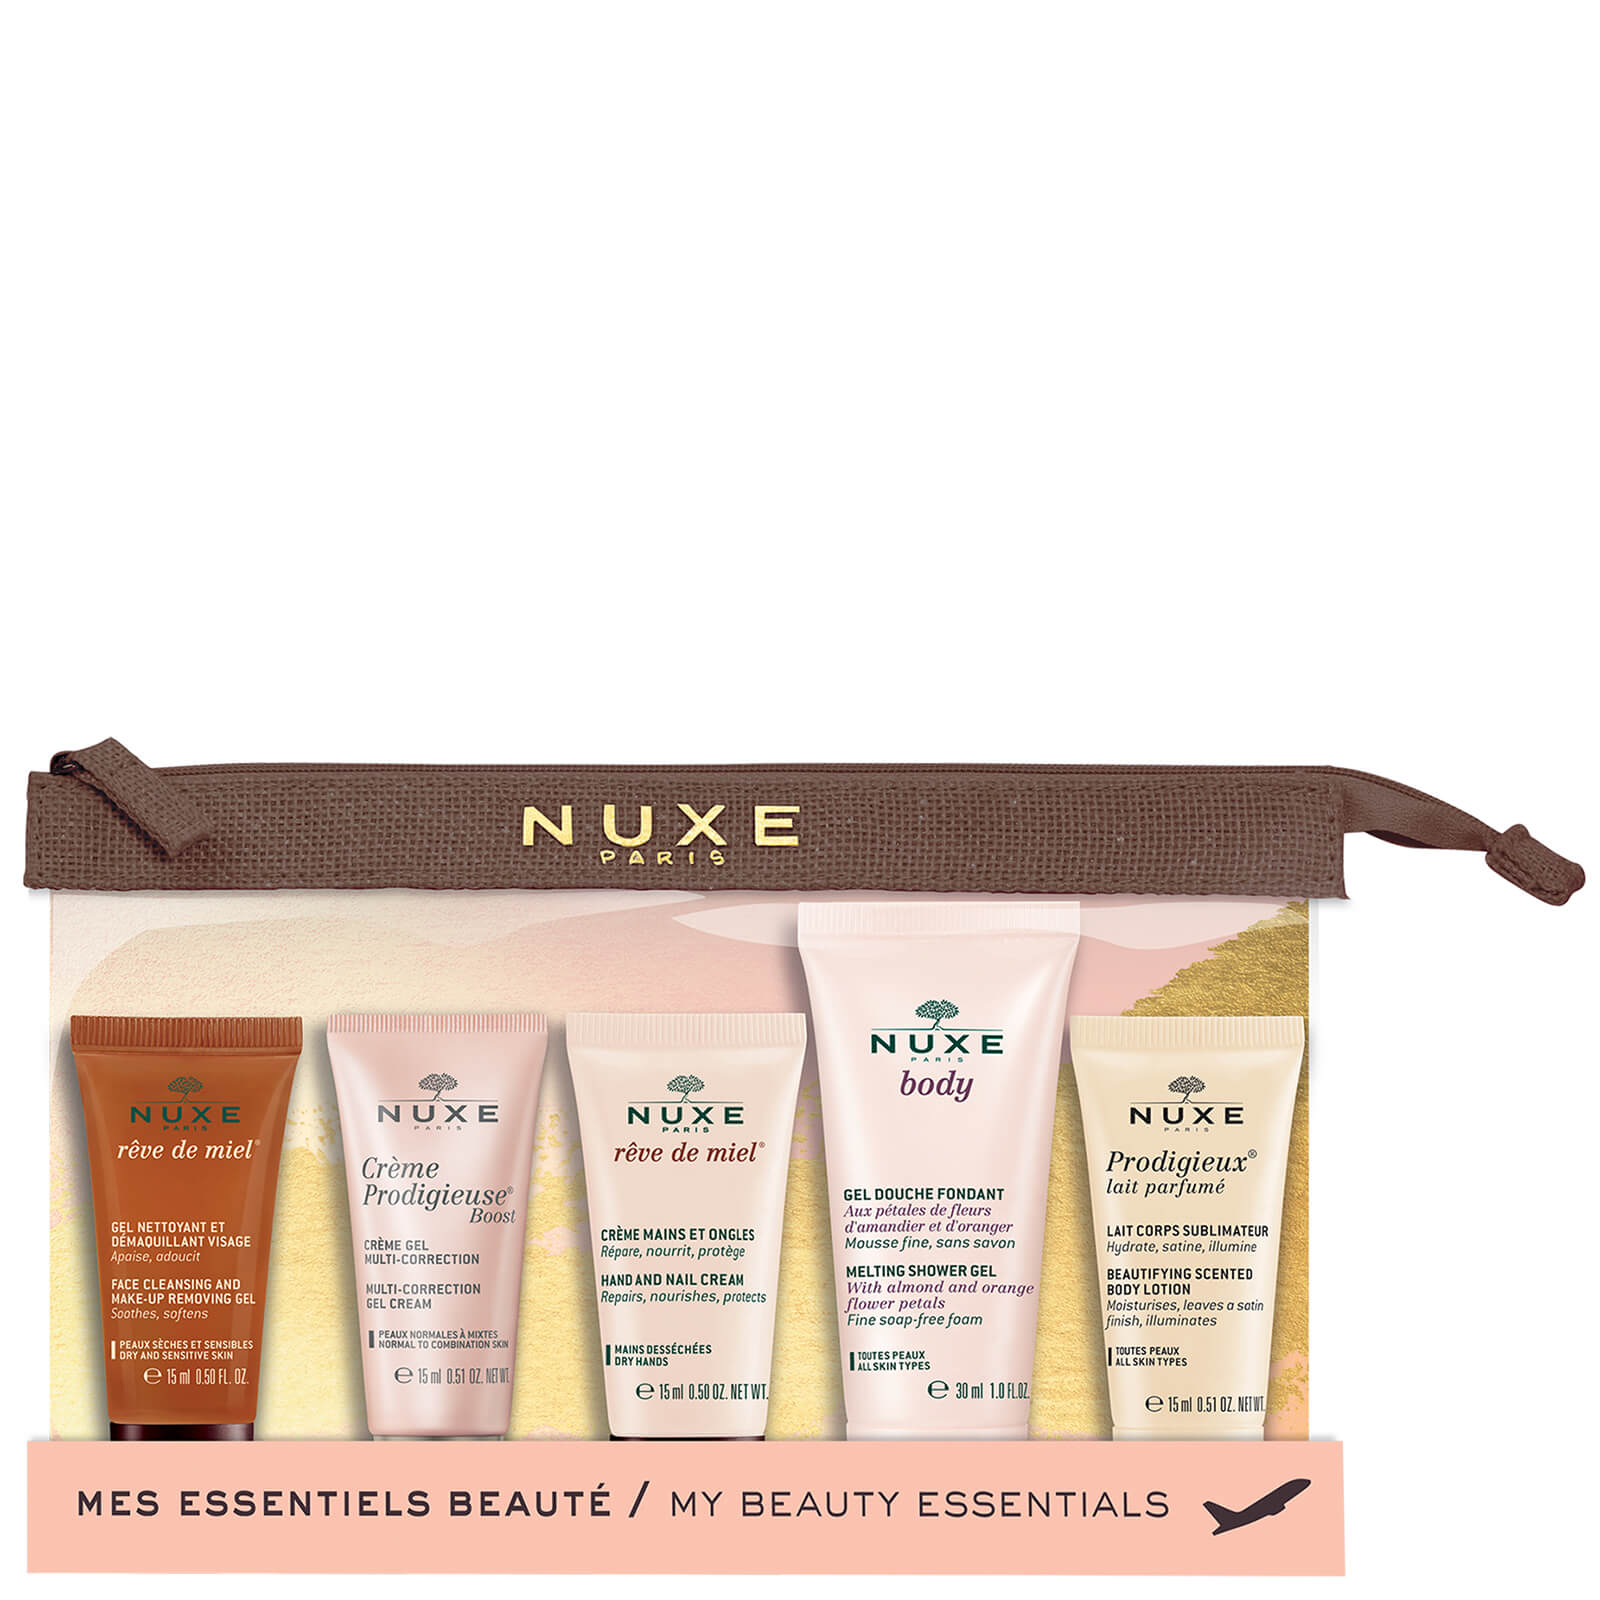 NUXE Travel Kit 2019